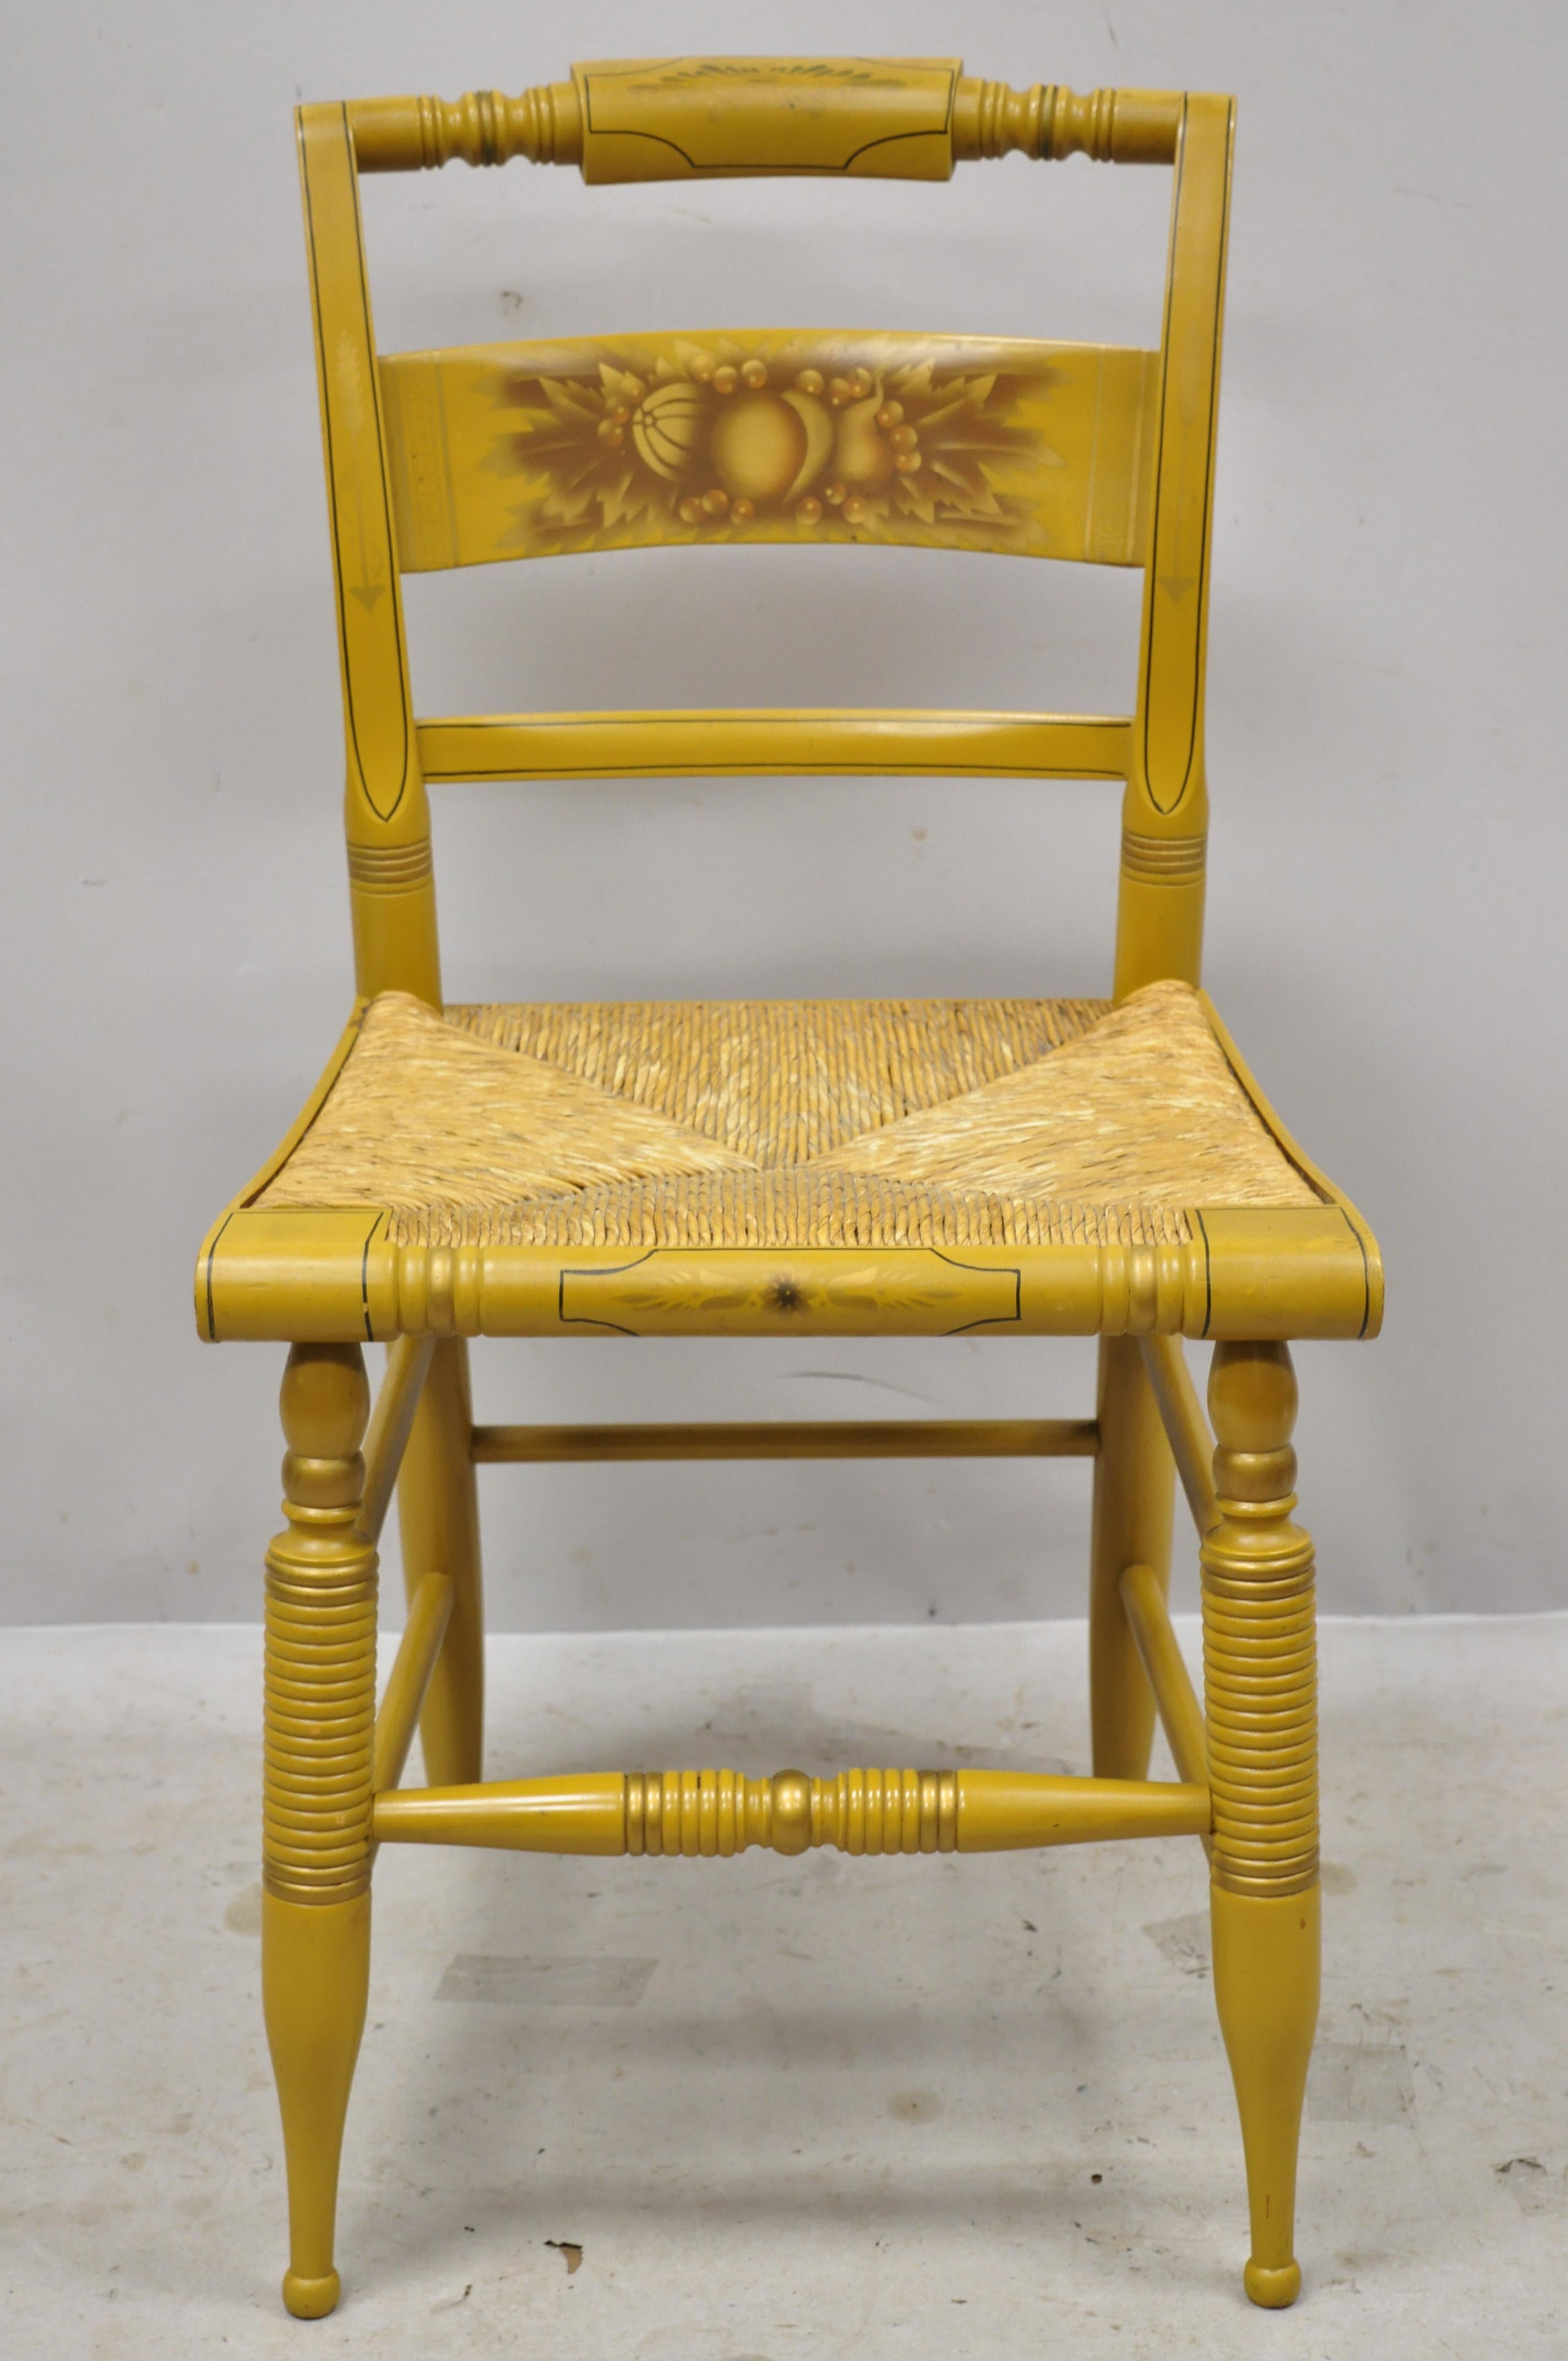 L. Hitchcock yellow stenciled rush seat dining side chair. Item features yellow stencil painted details, woven rush cord seat, solid wood construction, original signature, very nice vintage item, quality American craftsmanship, circa mid-20th